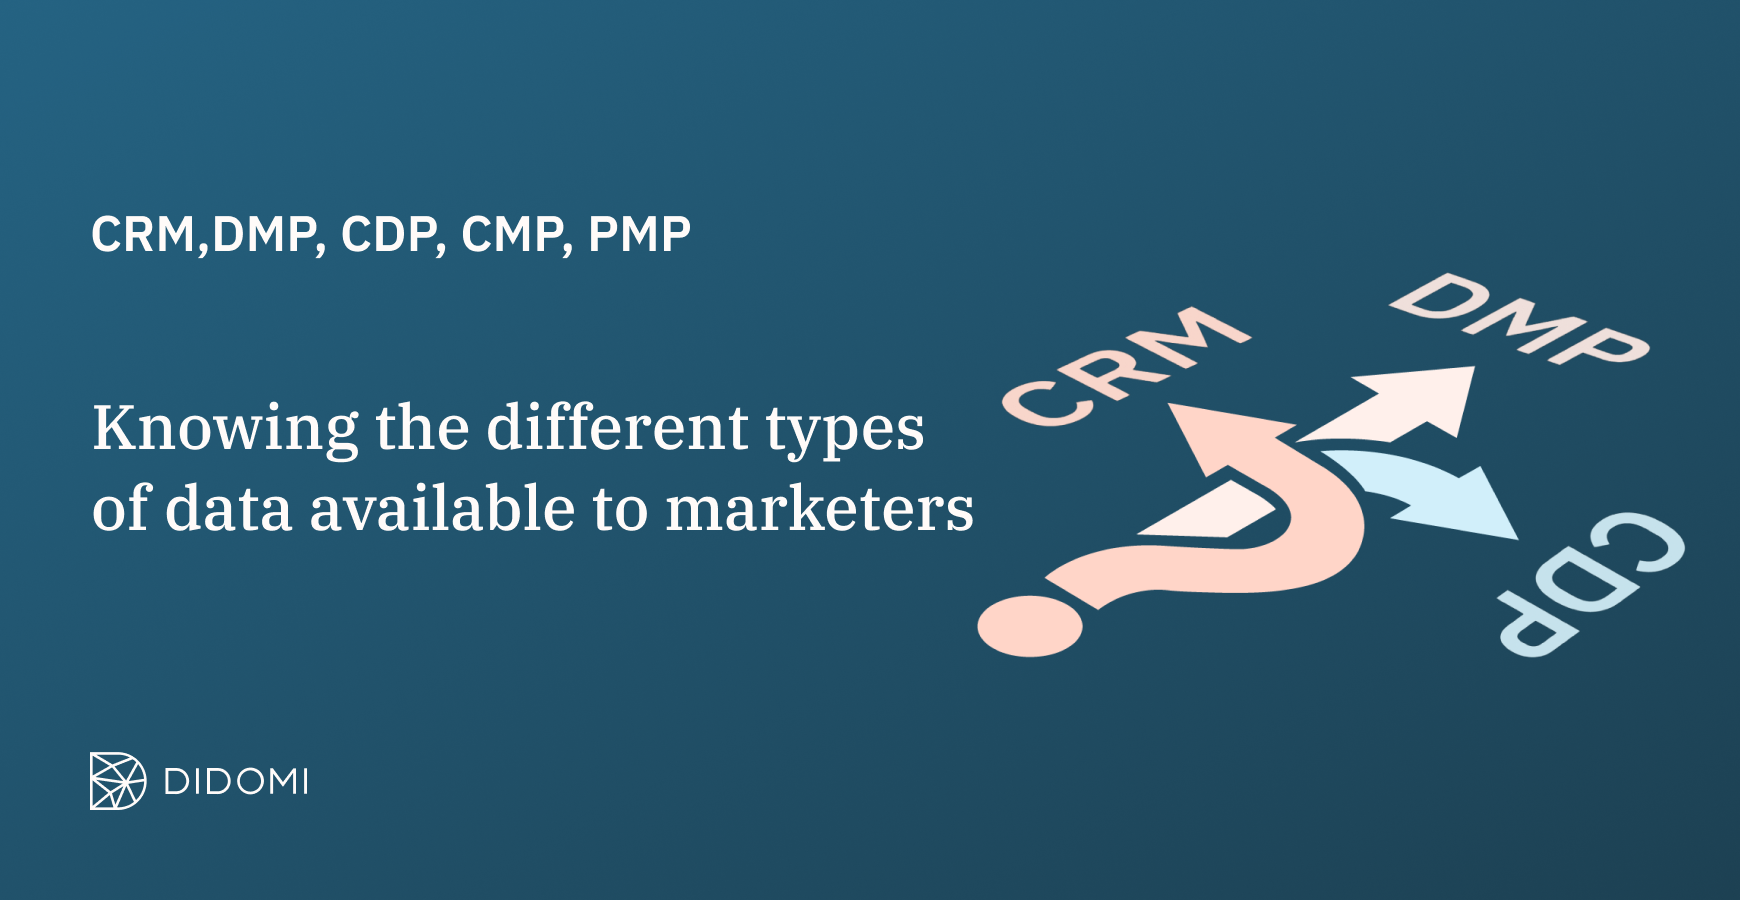 CRM, CDP, DMP, CMP, PMP: What is the difference?